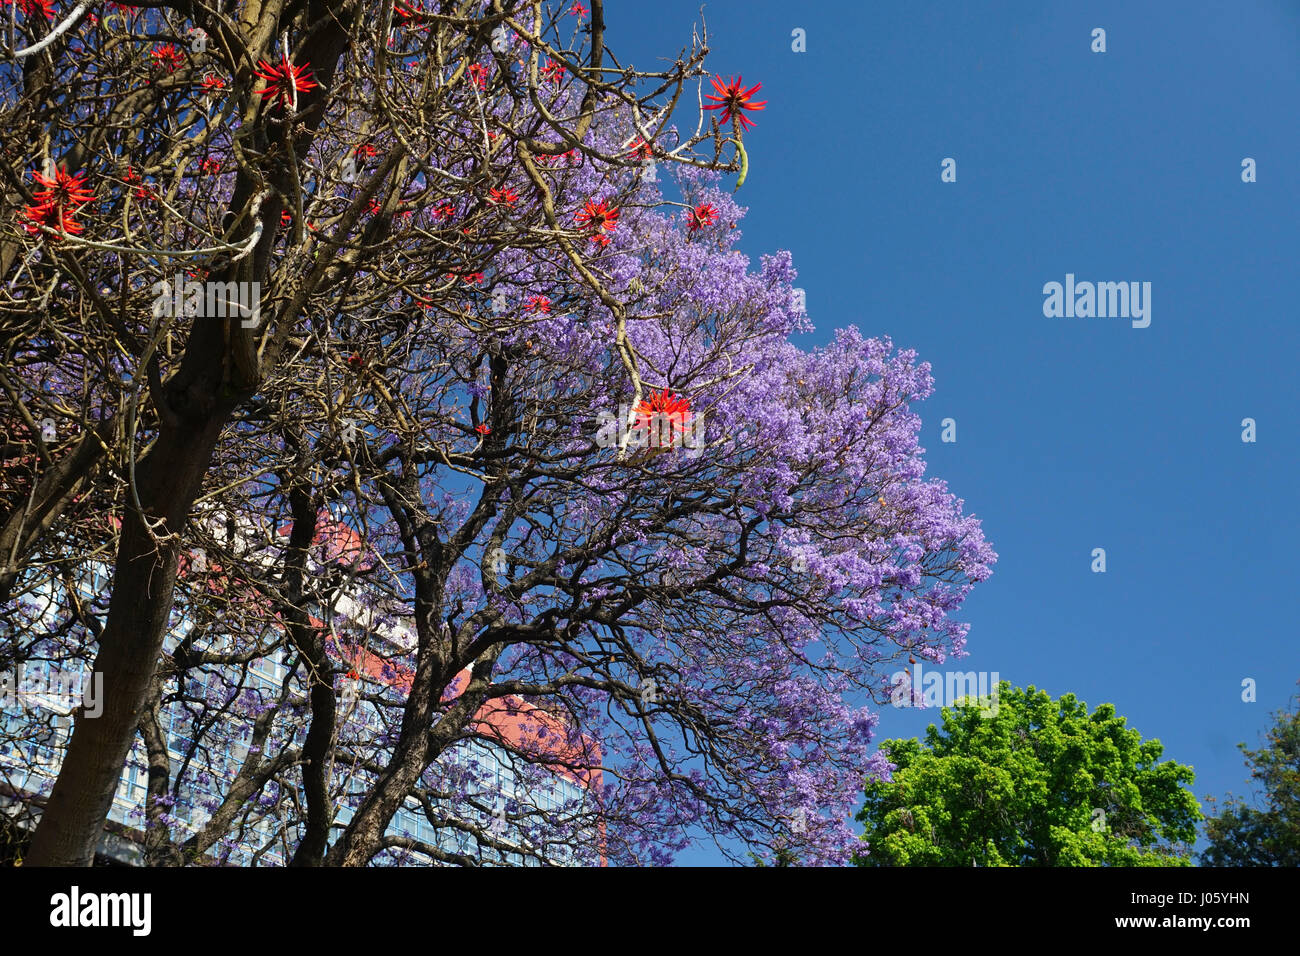 Jacaranda tree with purple flowers and red Erythrina tree (Erythrina coralloides) blossoms, Mexico City, Mexico. Stock Photo